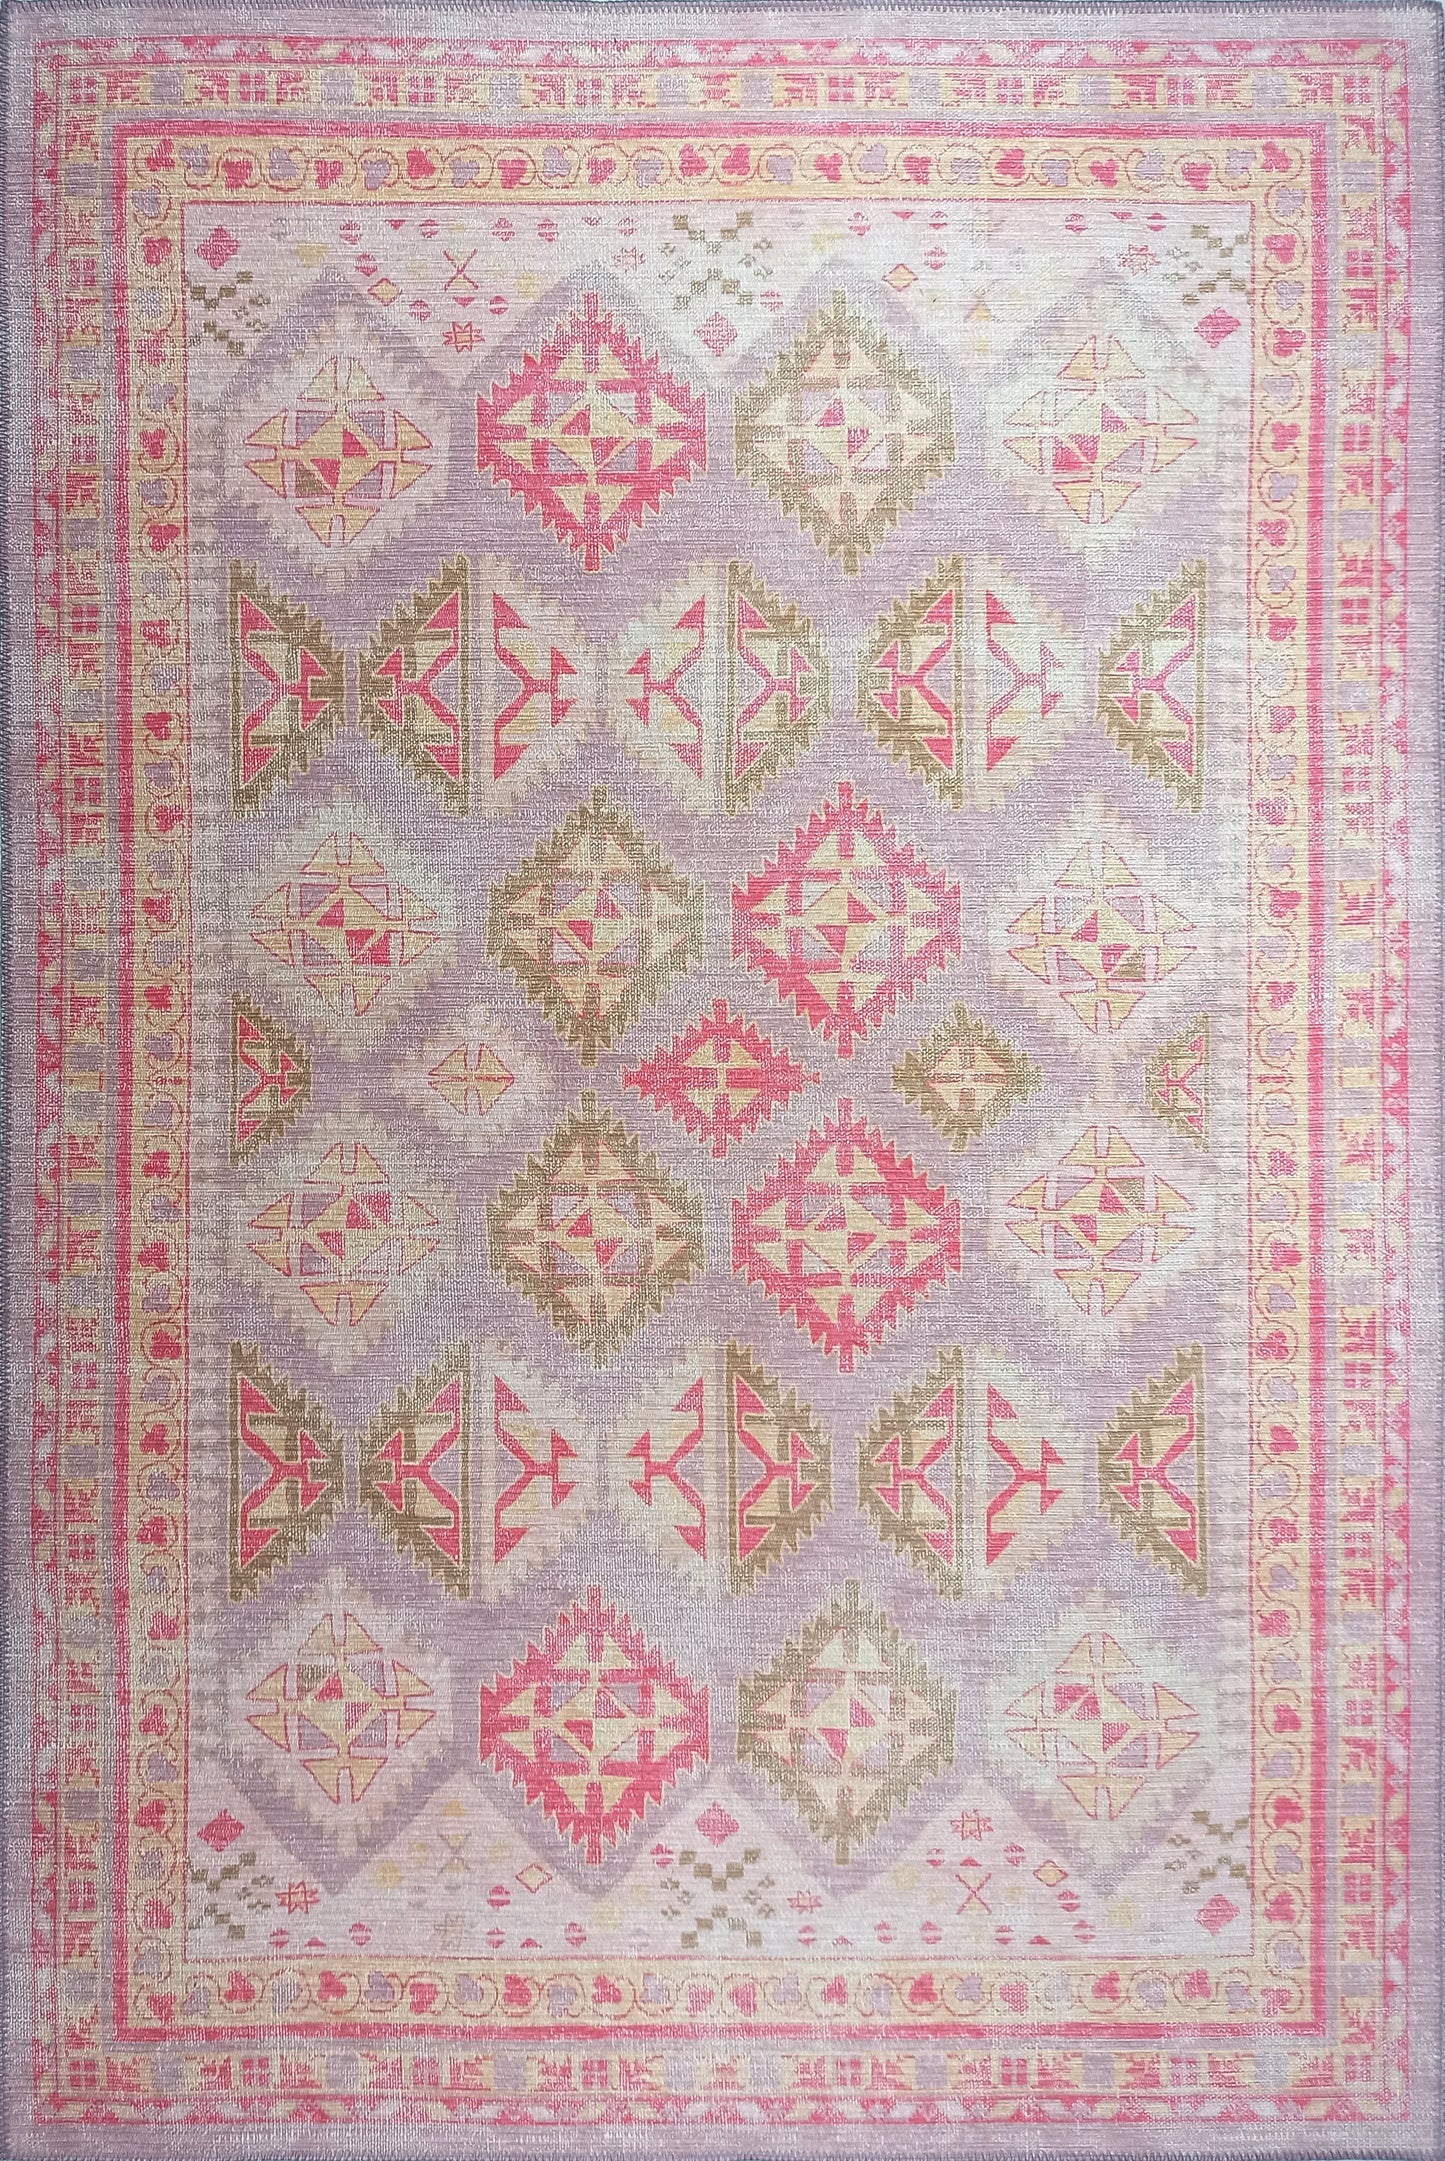 Lilac Herki Vintage Rug, Shades of Purple with a touch of Pink Shabby Luxury Oriental Geometric Pastel Turkish Area Rugs Living room Bedroom